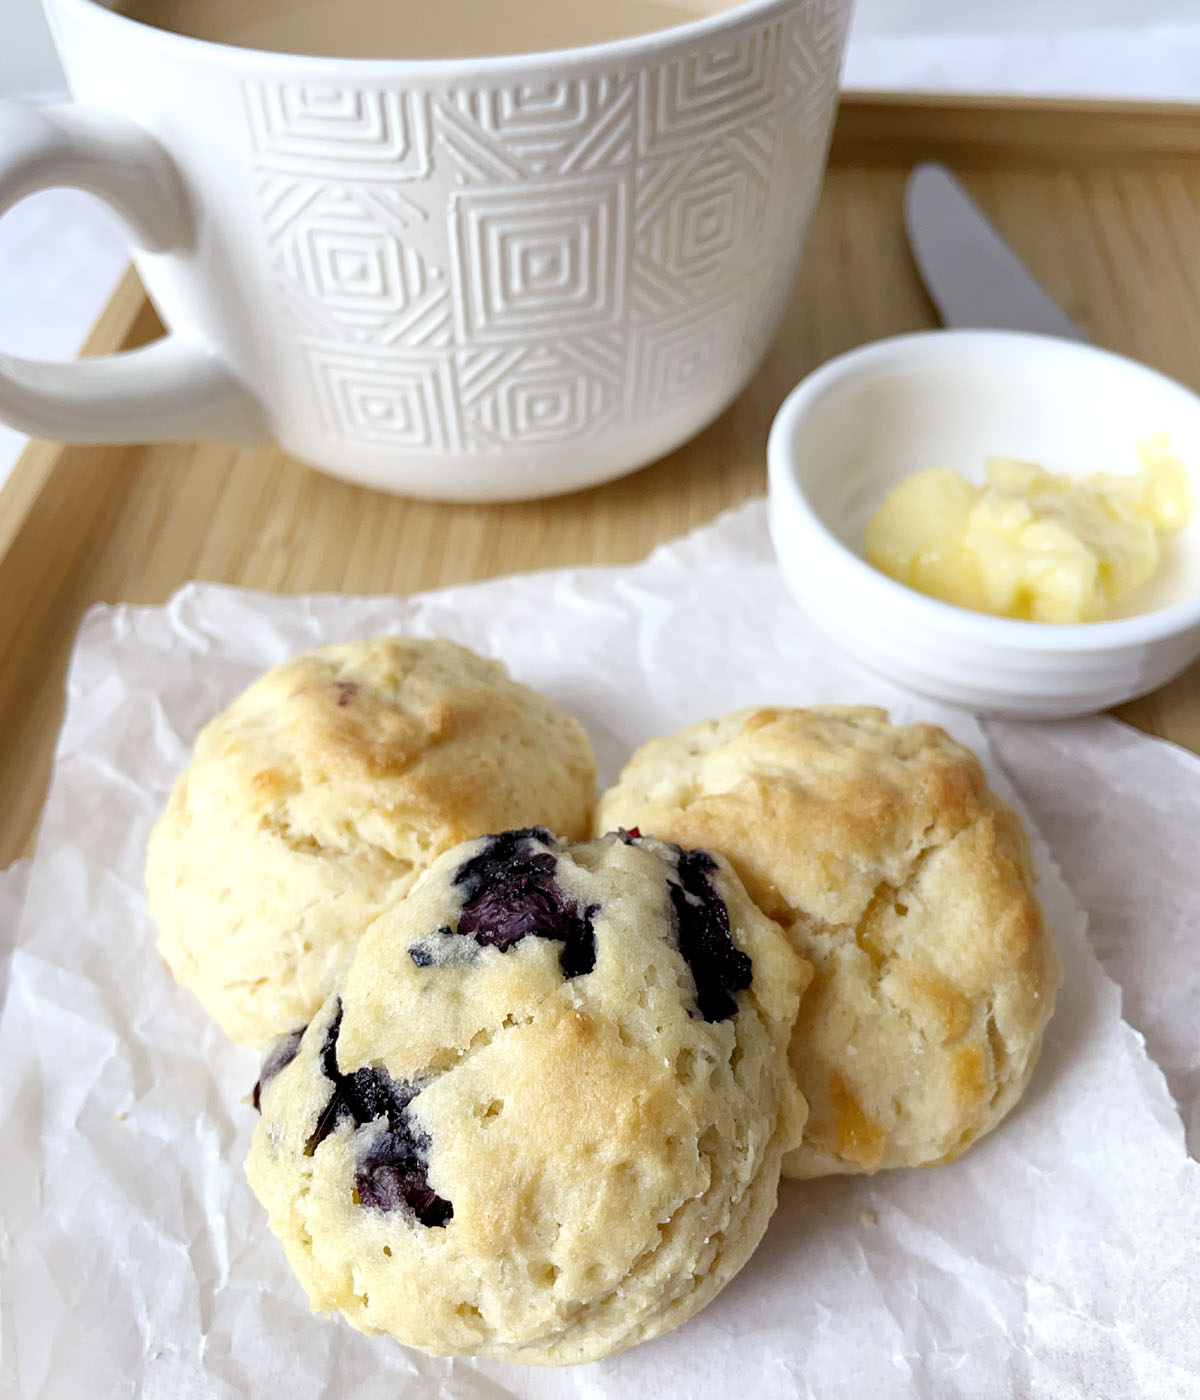 One blueberry scone and two cheese tea scones on white parchment paper, next to a dish of yellow butter and a white mug of tea.